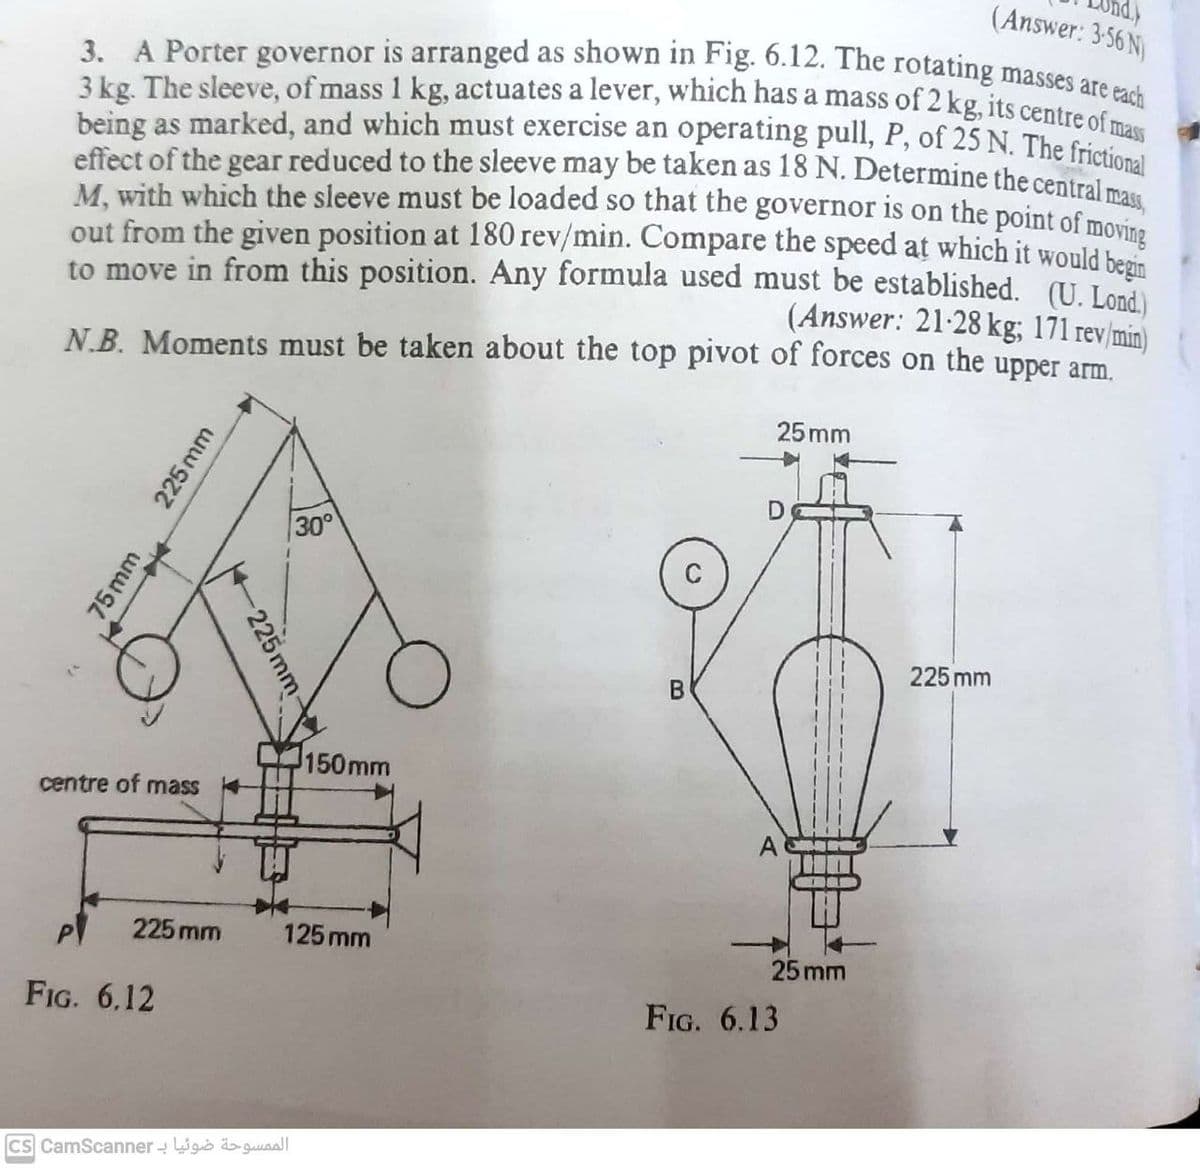 (Answer: 3.56 N)
3. A Porter governor is arranged as shown in Fig. 6.12. The rotating masses are each
3 kg. The sleeve, of mass 1 kg, actuates a lever, which has a mass of 2 kg, its centre of mass
being as marked, and which must exercise an operating pull, P, of 25 N. The frictional
effect of the gear reduced to the sleeve may be taken as 18 N. Determine the central mass
M, with which the sleeve must be loaded so that the governor is on the point of moving
out from the given position at 180 rev/min. Compare the speed at which it would begin
to move in from this position. Any formula used must be established. (U. Lond
(Answer: 21-28 kg; 171 rev/min)
N.B. Moments must be taken about the top pivot of forces on the upper arm.
75mm
*
225 mm
centre of mass
FIG. 6.12
P 225 mm
225 mm
30°
الممسوحة ضوئيا بـ cs CamScanner
150mm
125 mm
M
25mm
D
D
25 mm
FIG. 6.13
225 mm